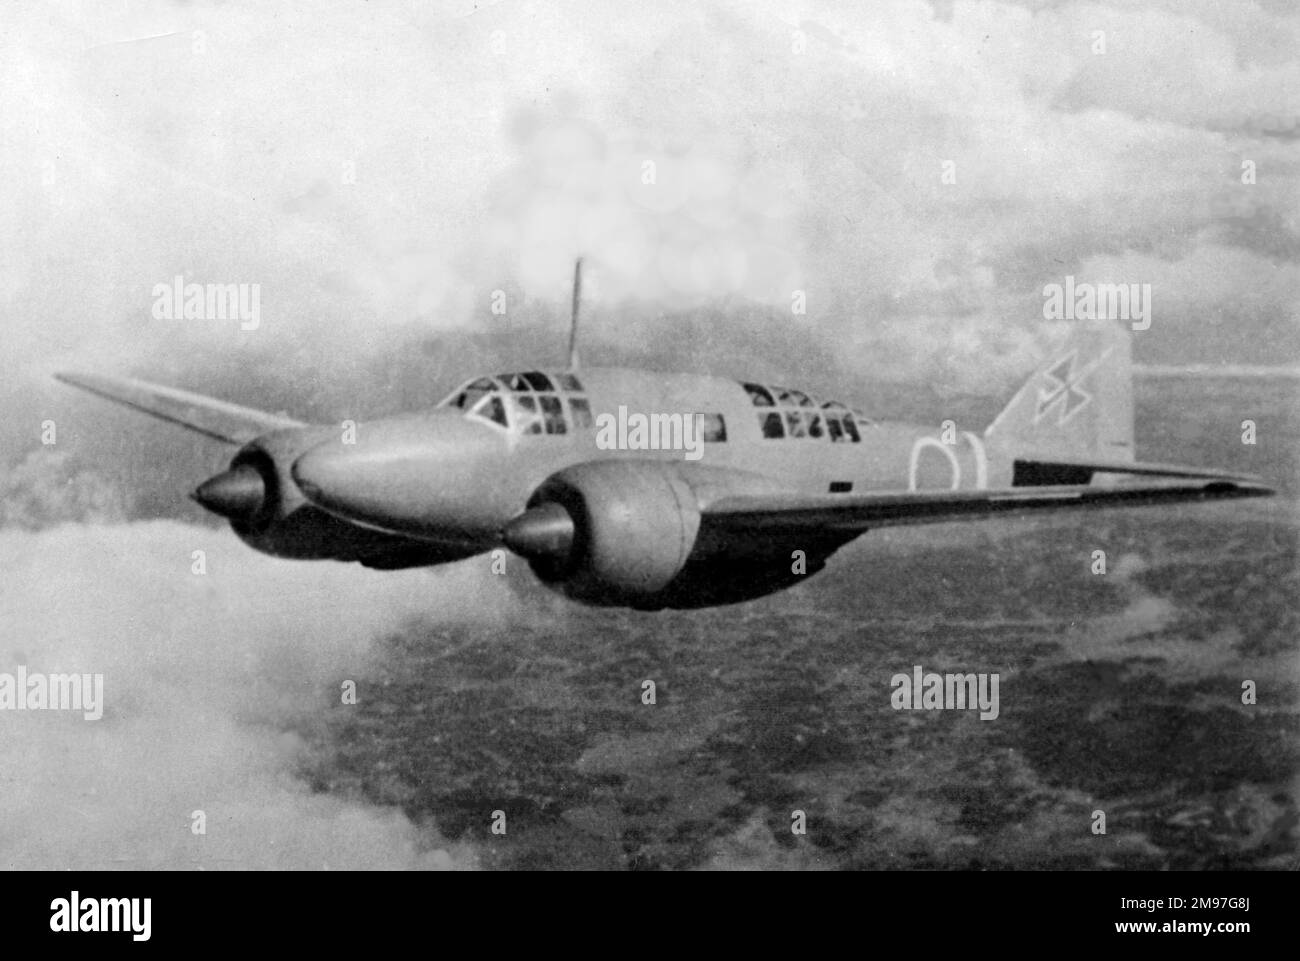 Mitsubishi Ki-46-II 'Dinah' -Used between mid-19441-1945 by the Japanese Army for long range reconnaissance. Stock Photo